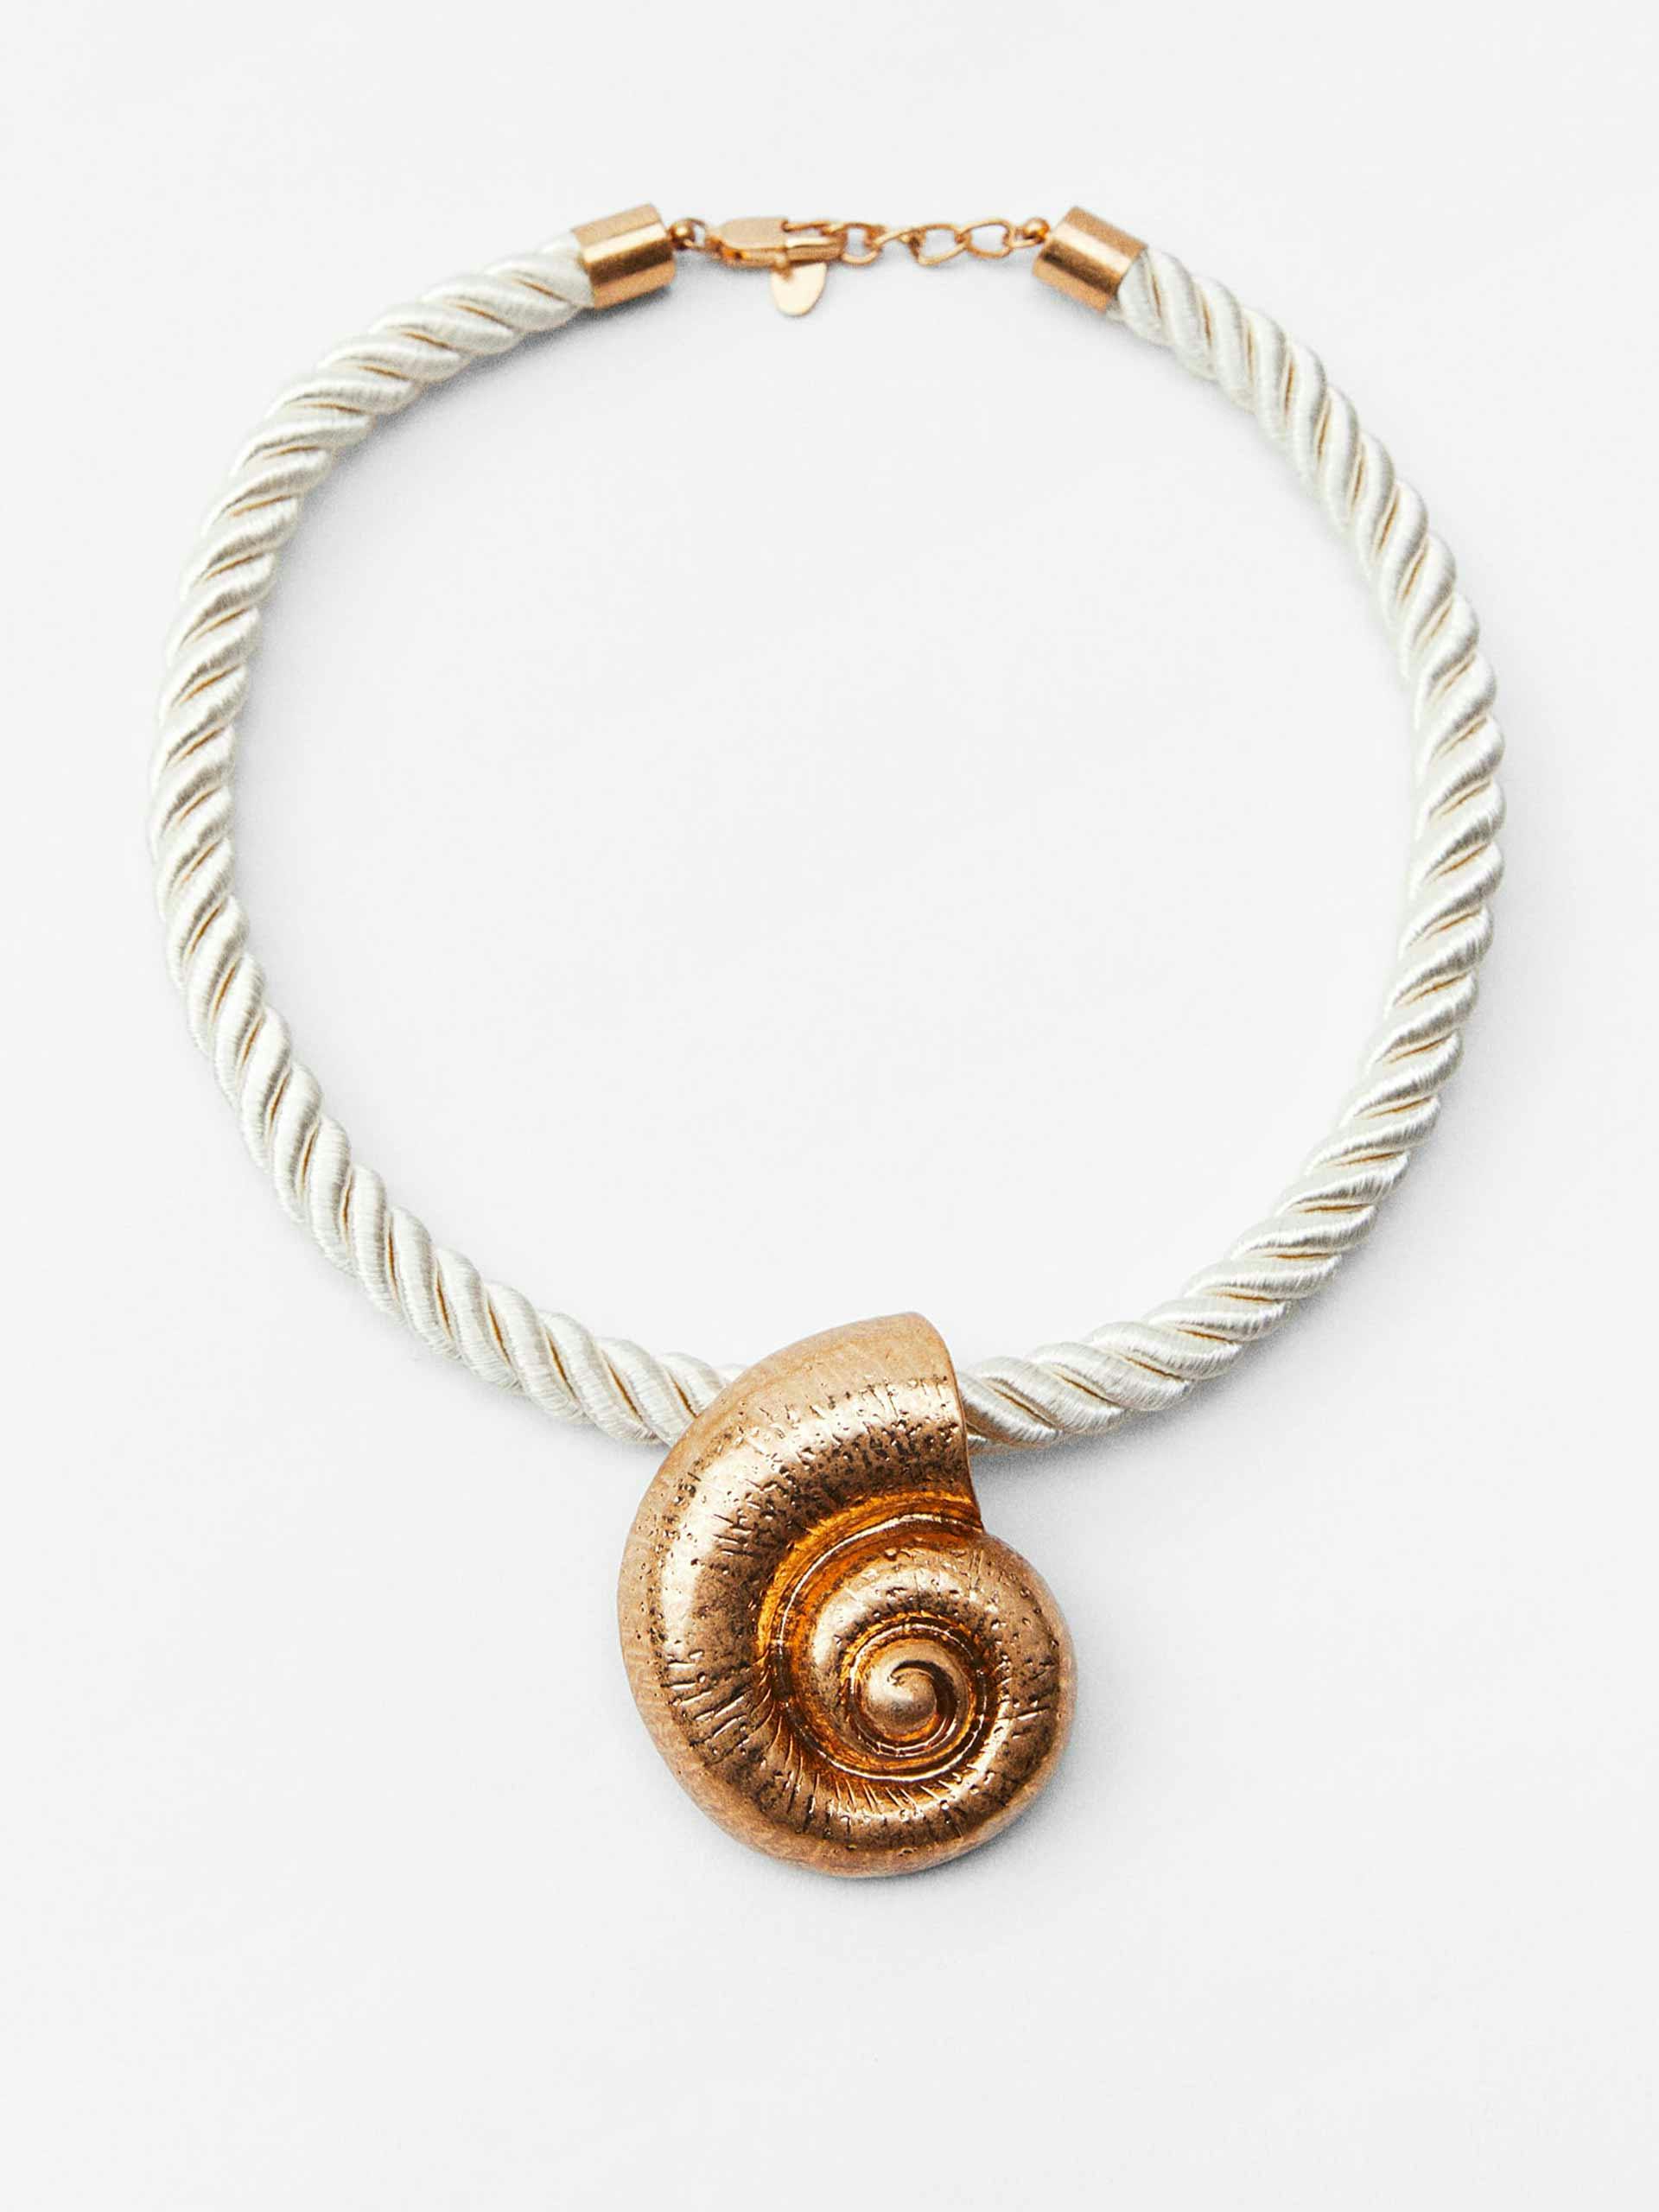 Seashell cord necklace